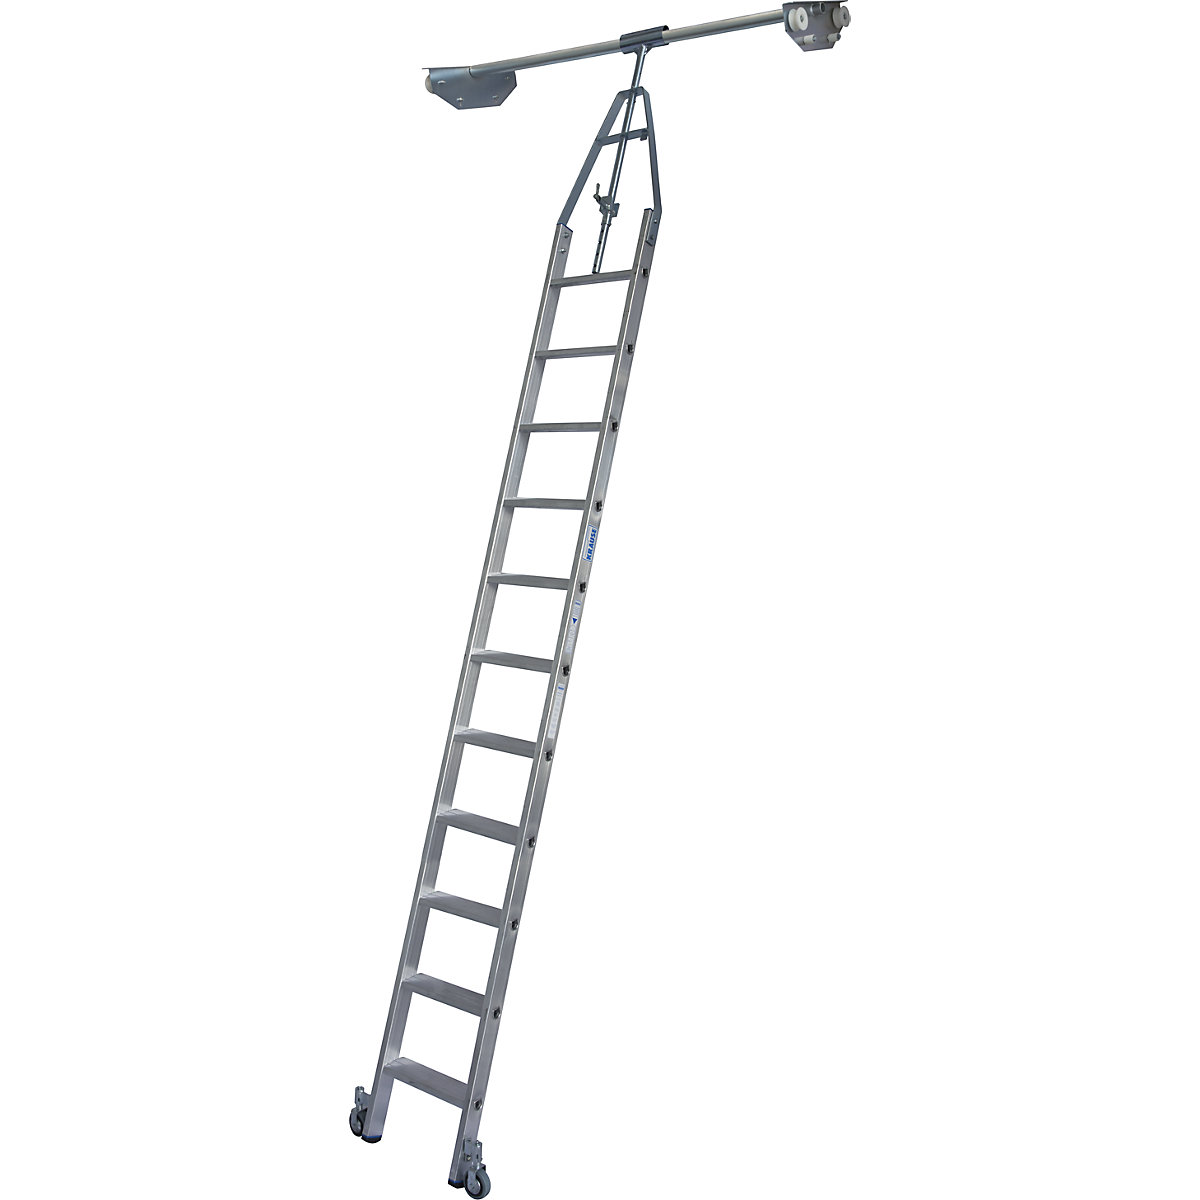 Step shelf ladder – KRAUSE, double sided shelf unit with wheel unit on top for round tubing rail system, 11 steps-2